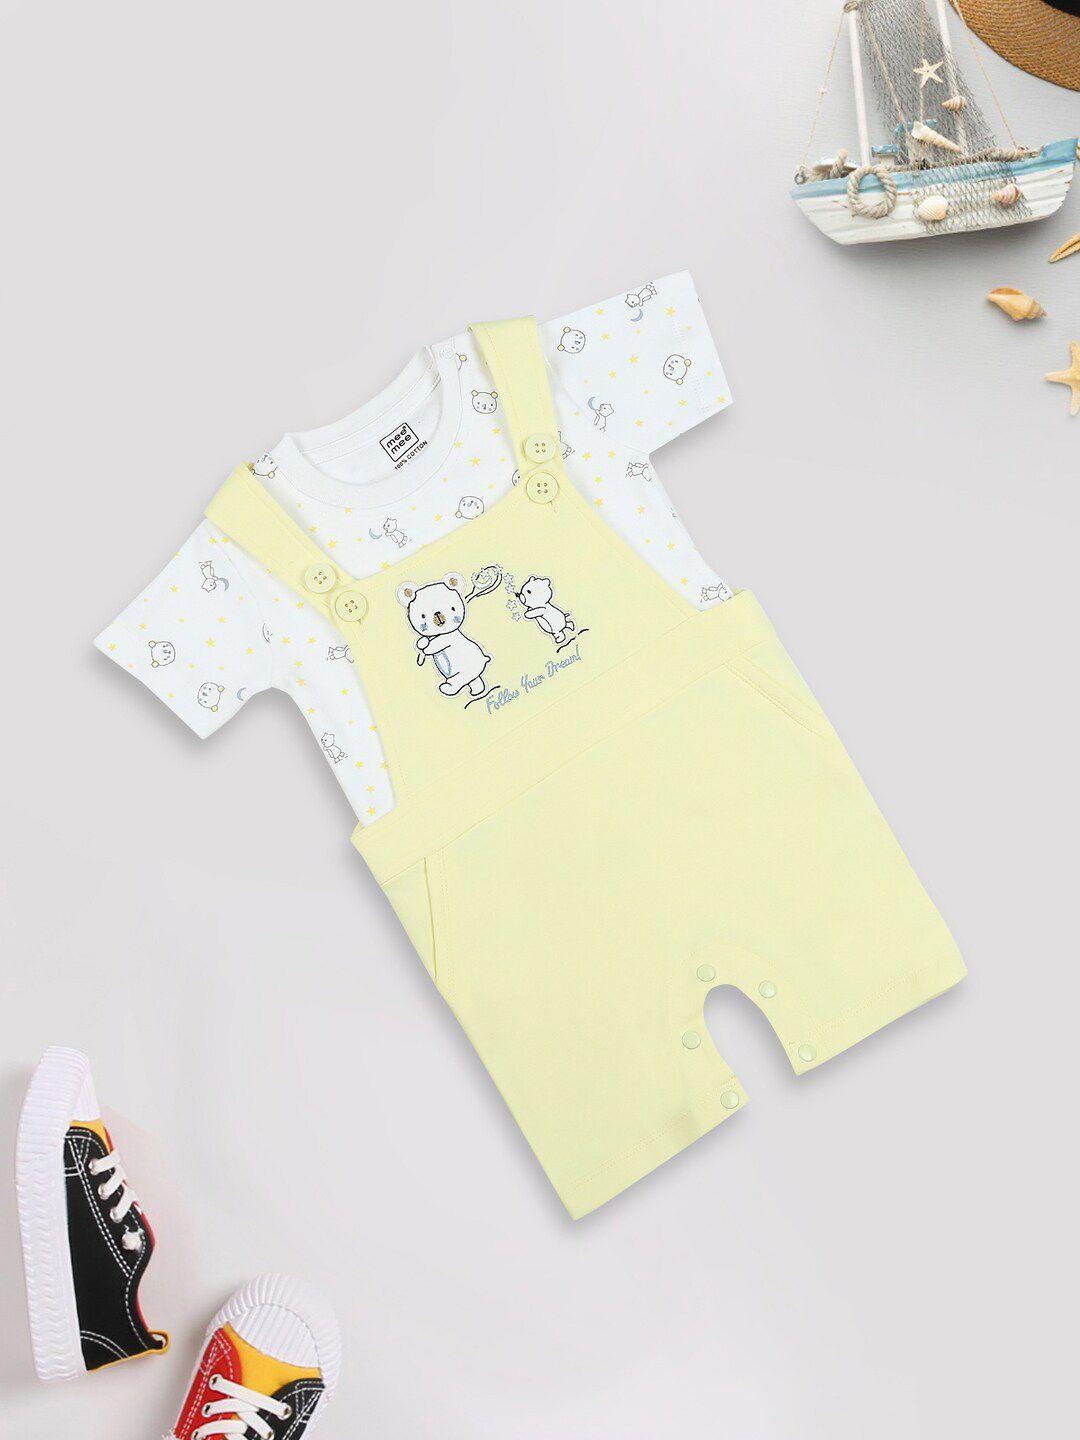 meemee infants embroidered cotton rompers